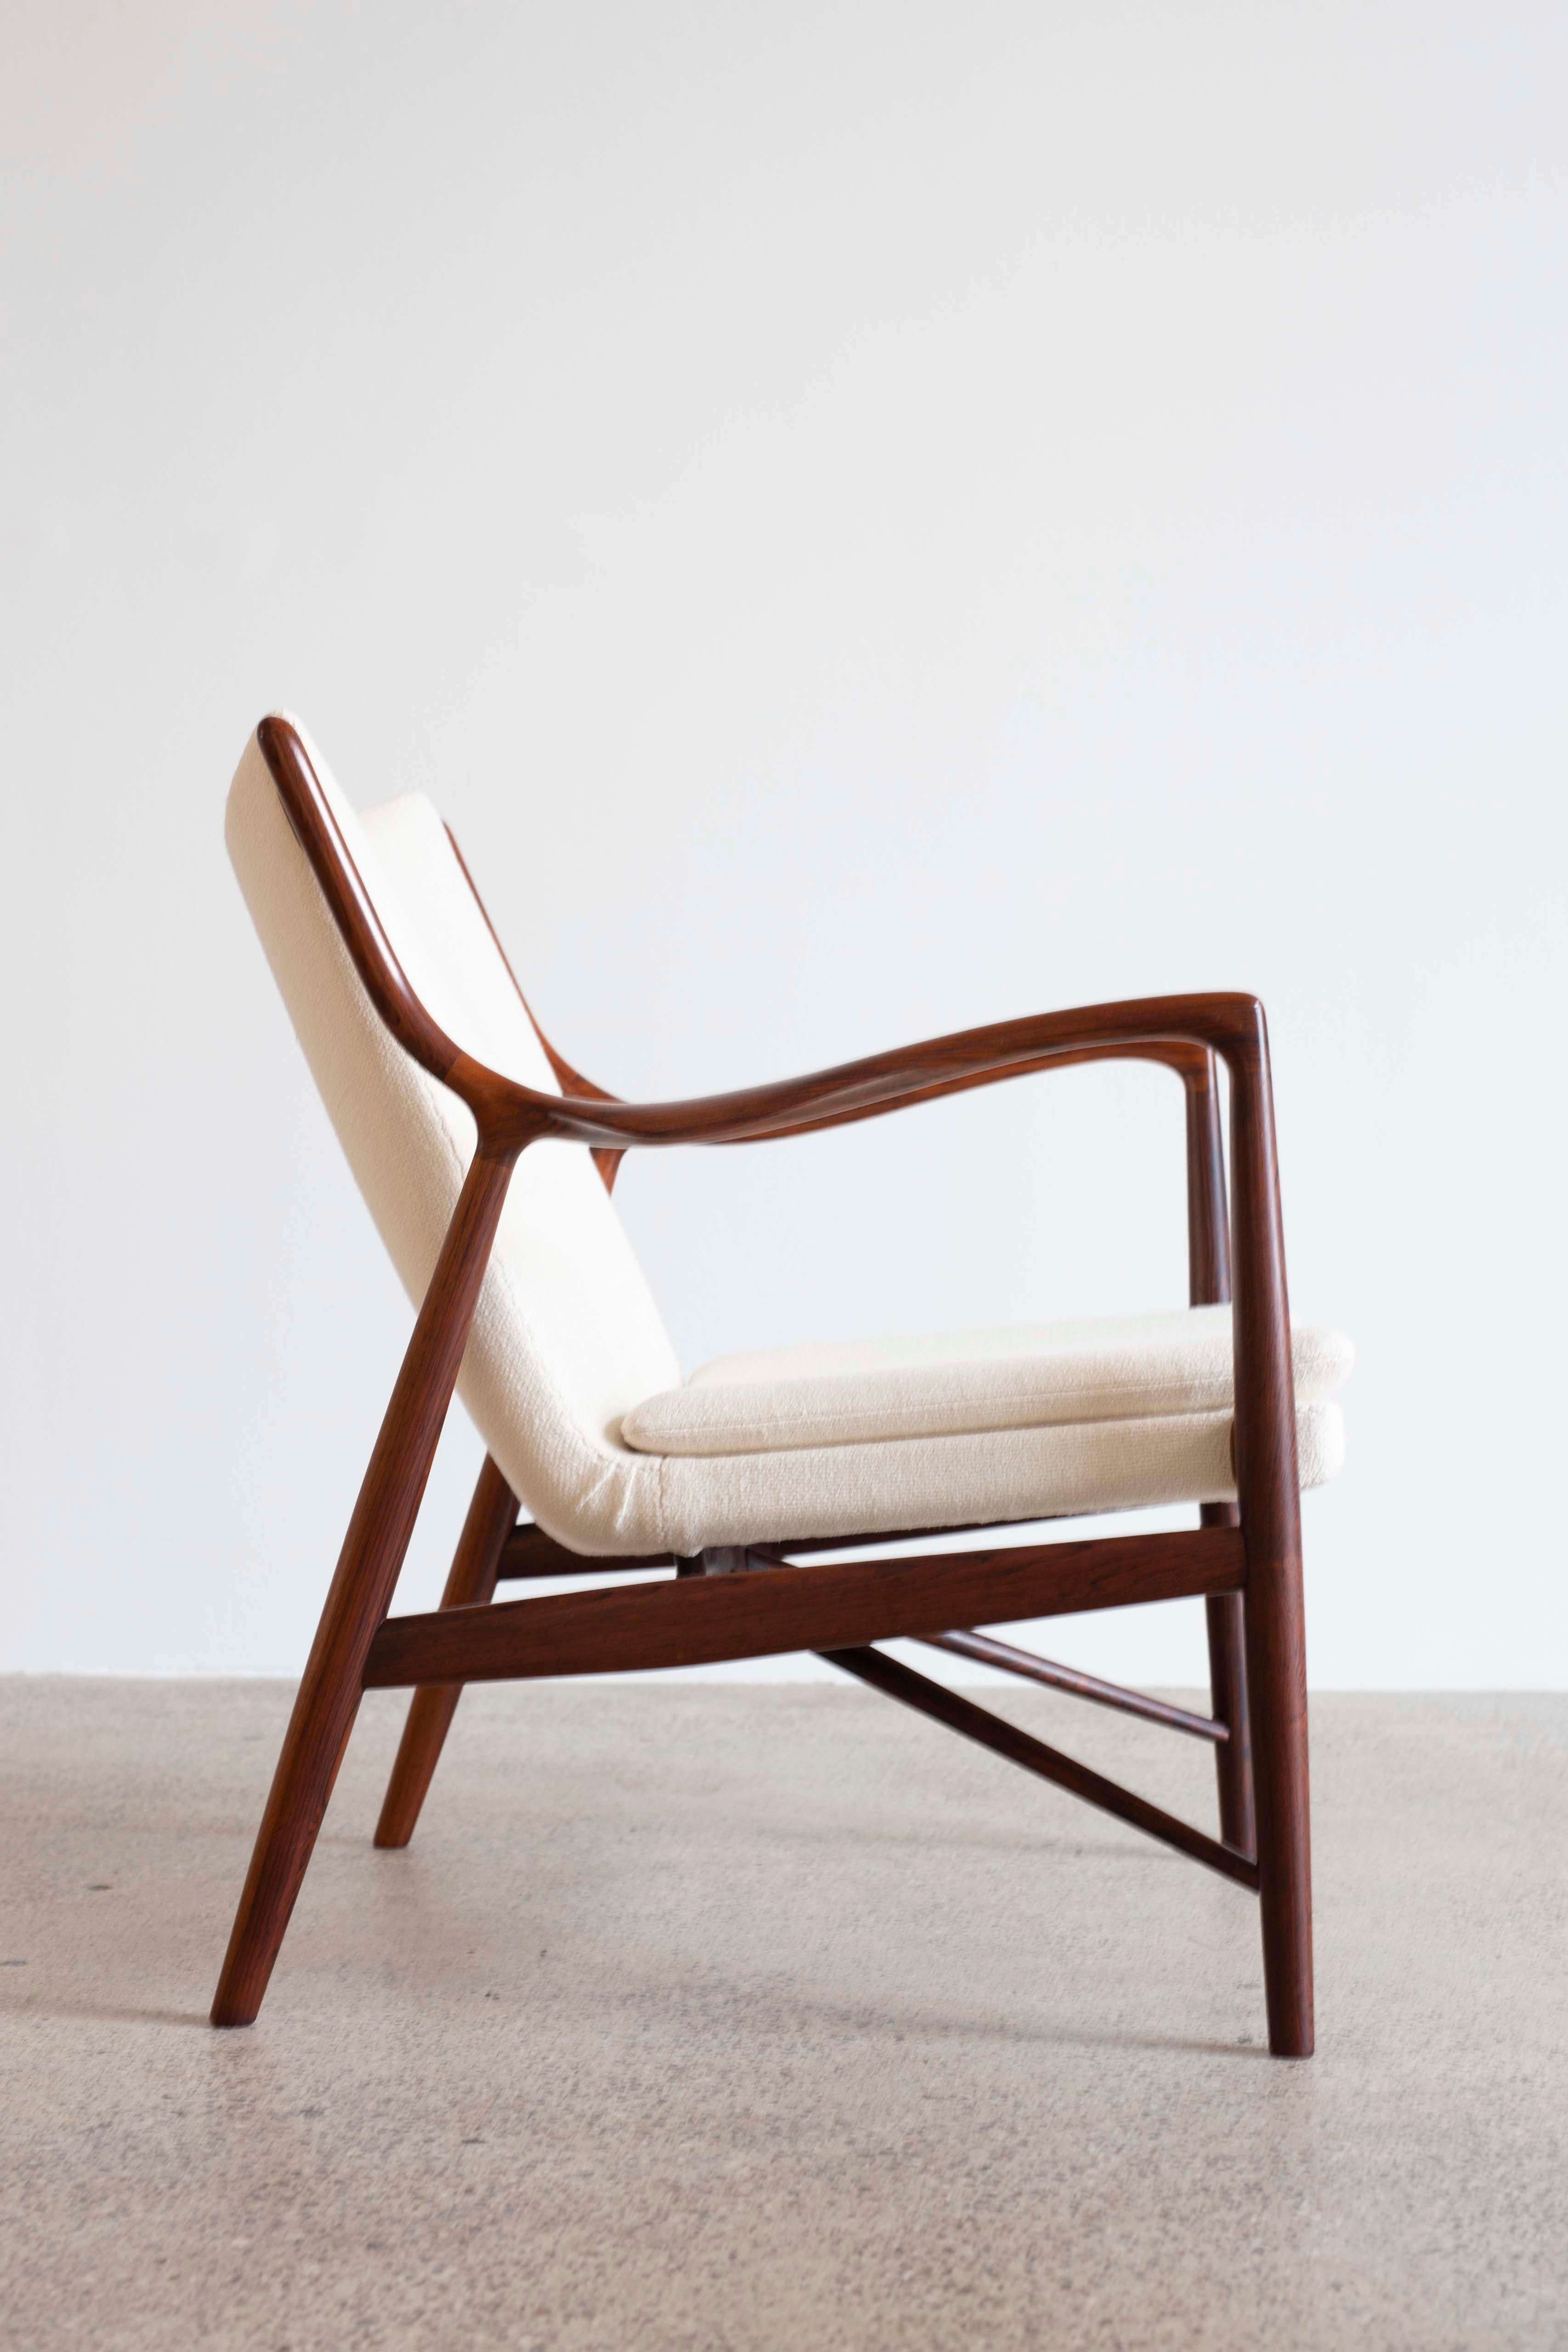 Finn Juhl NV-45 chair with frame of Brazilian rosewood, upholstered with fabric. 
Designed 1945 and made at cabinetmaker Niels Vodder. Stamped by maker. 
Very fine condition. 

A pair of 45 chairs in rosewood available.
 